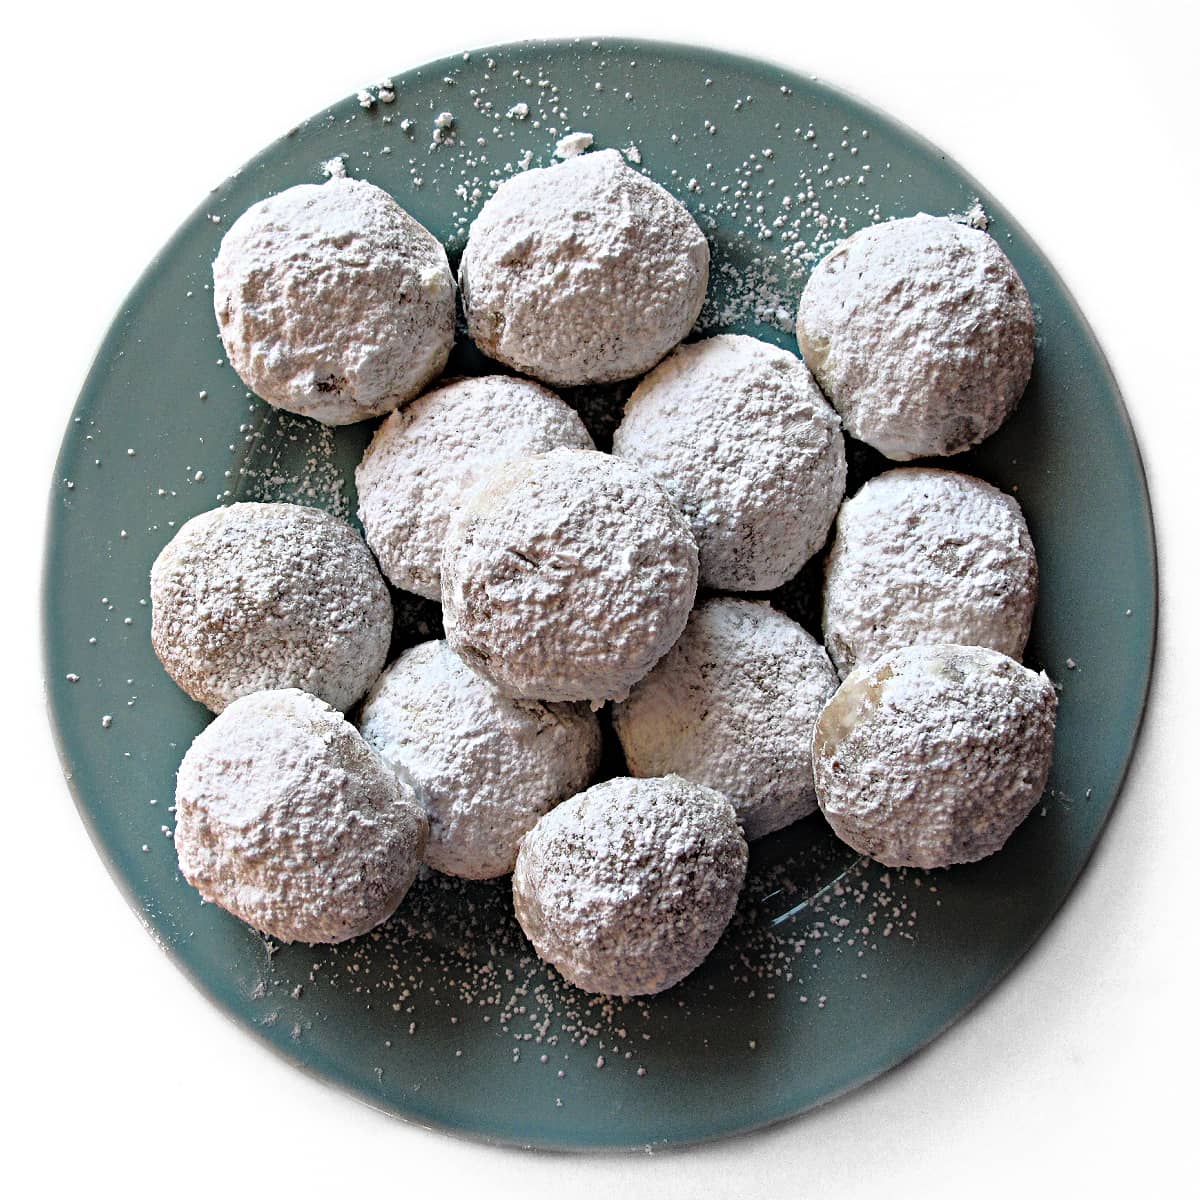 Round ball shaped cookies coated in powdered sugar.